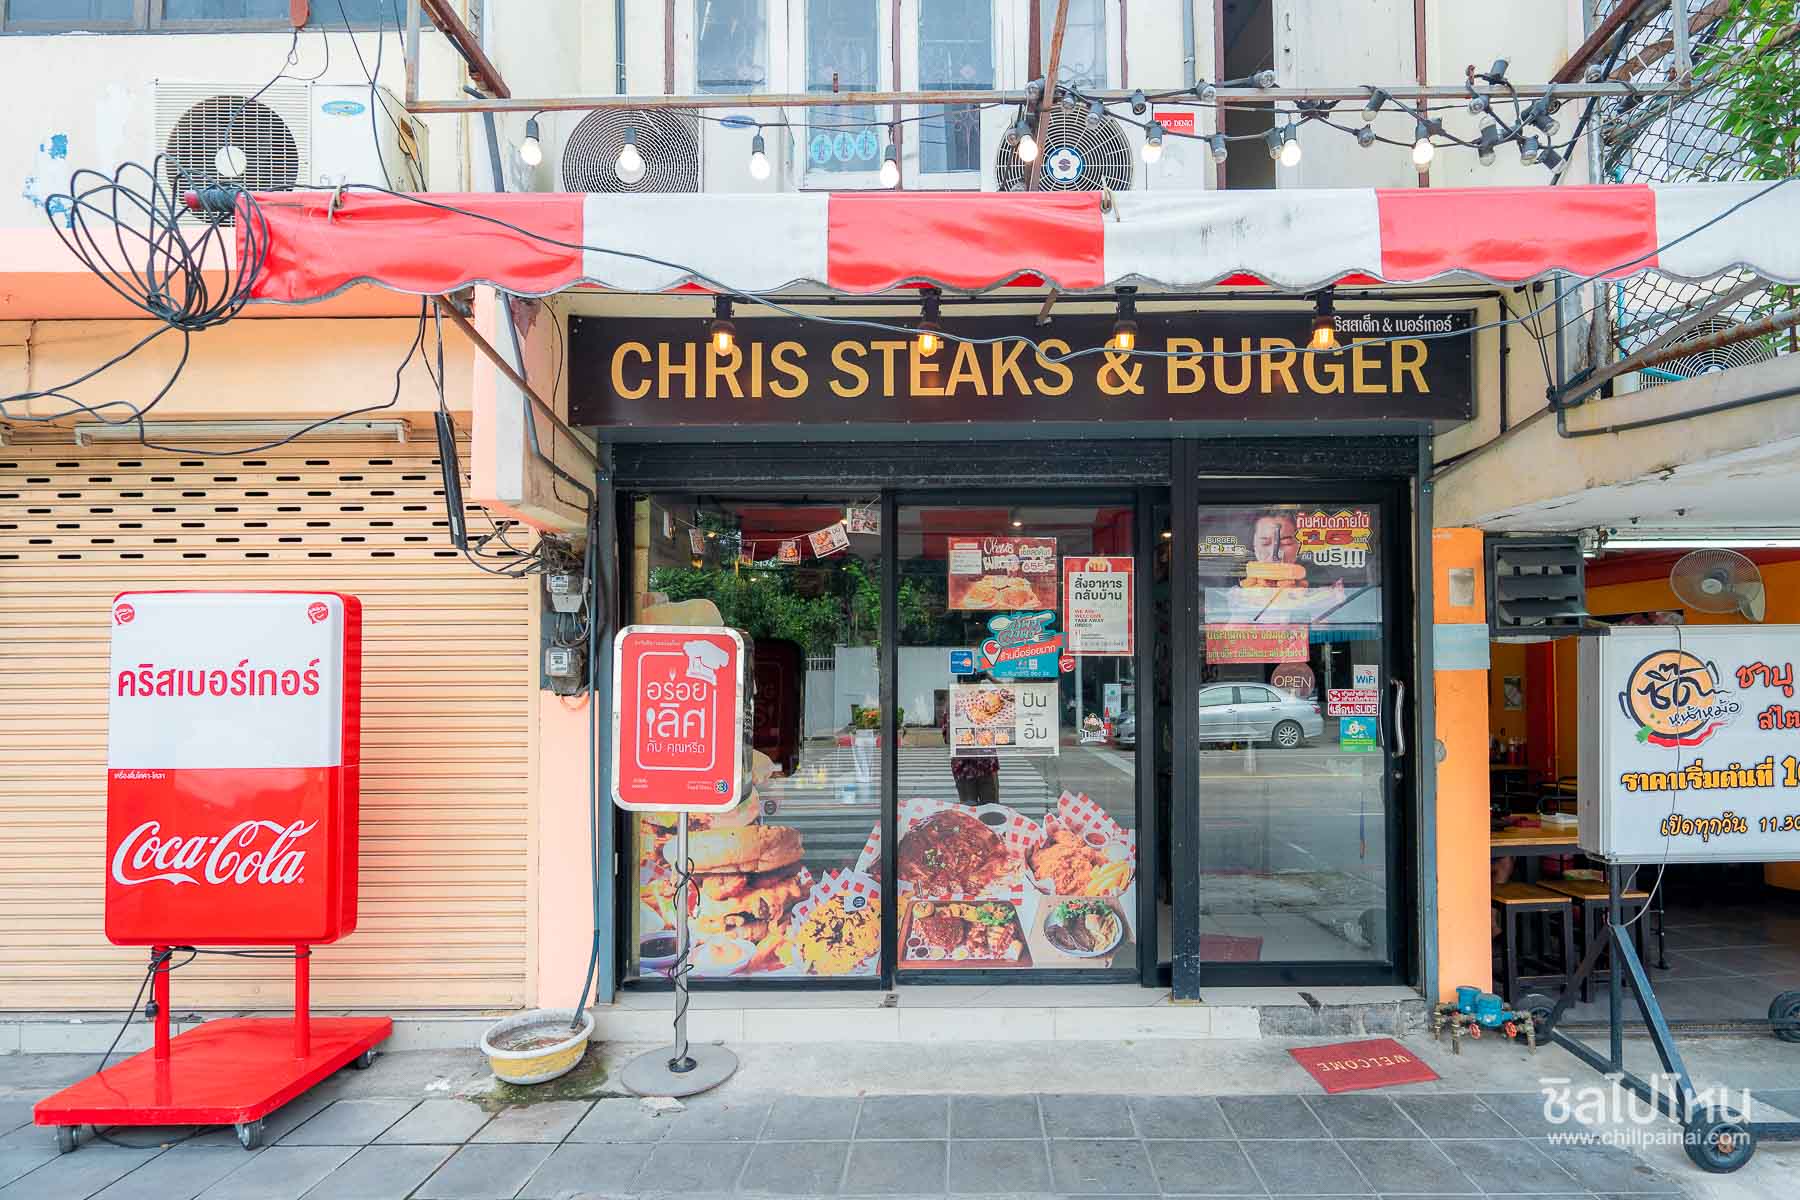 Chris Steaks and Burger